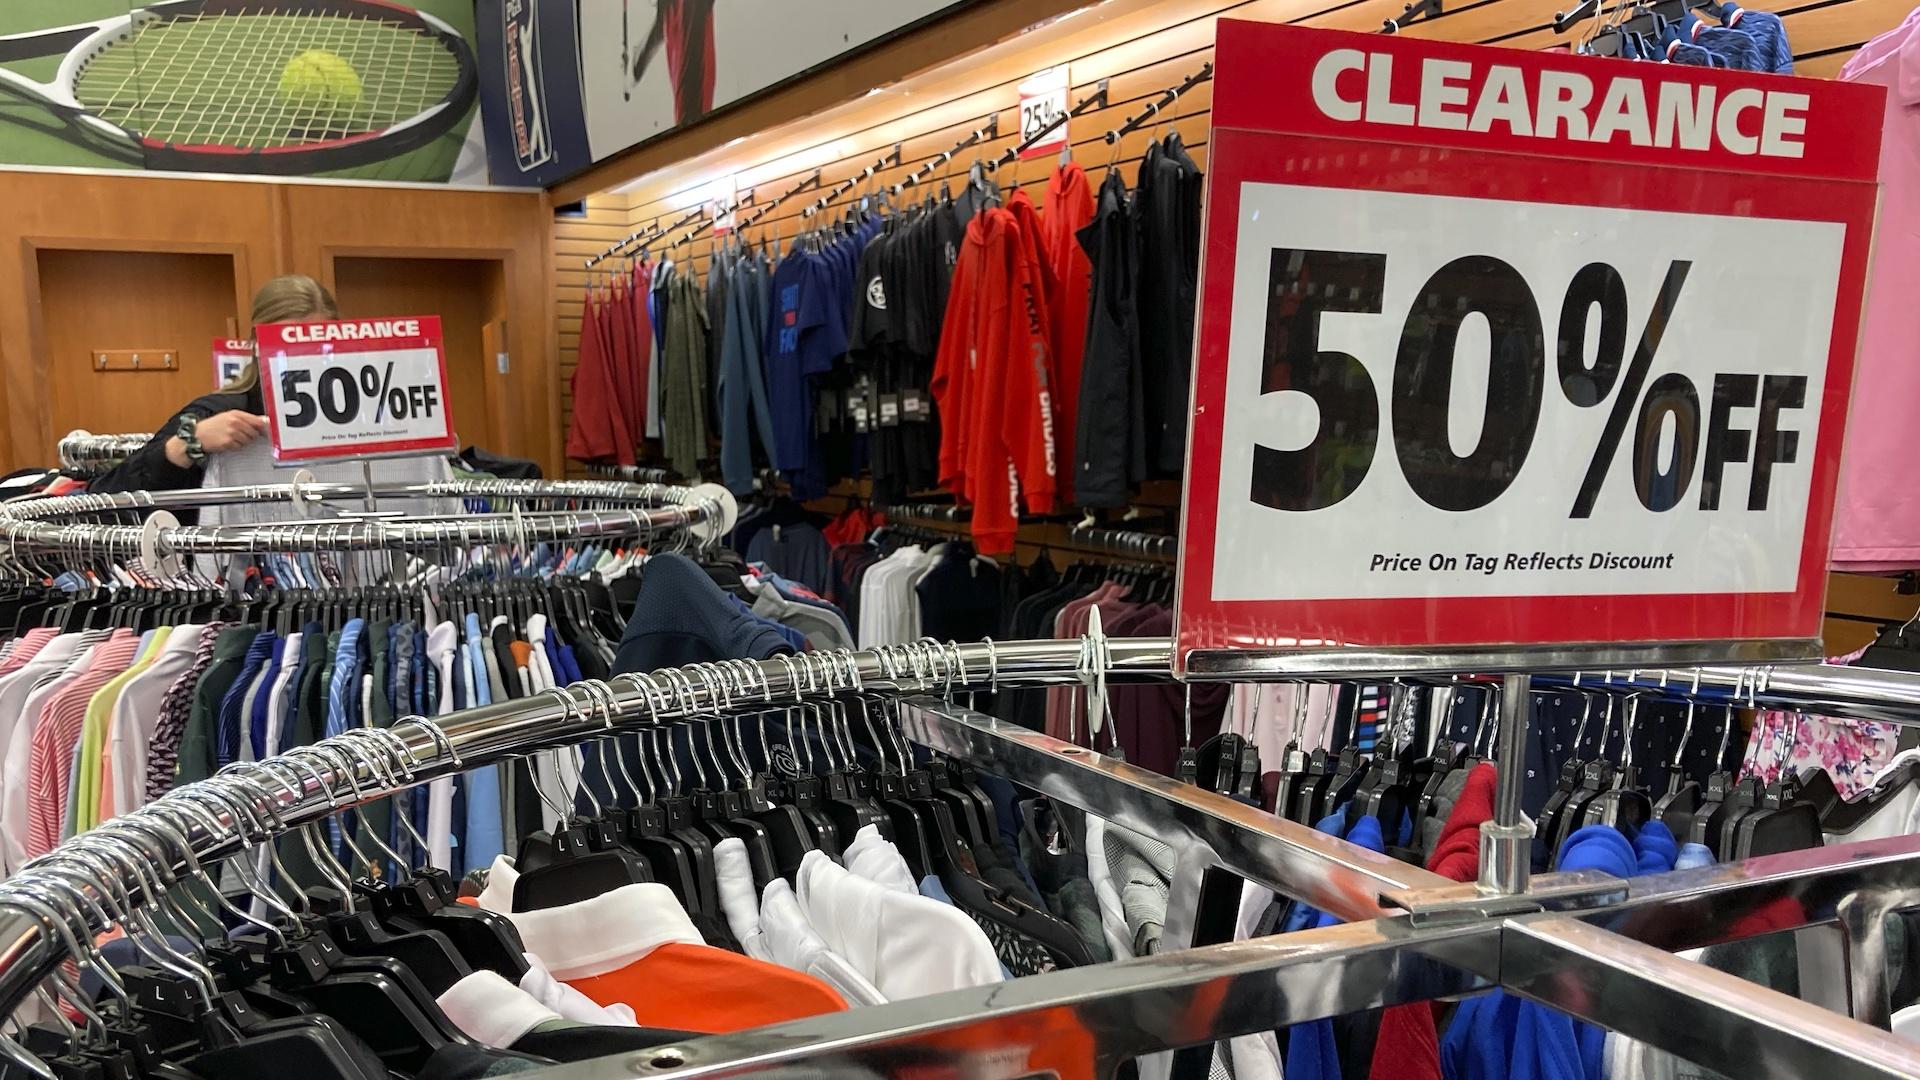 Clearance sale signs are displayed at a retail store in Downers Grove, Ill., Wednesday, April 26, 2023. On Wednesday, the Labor Department reports on U.S. consumer prices for April. (AP Photo/Nam Y. Huh)